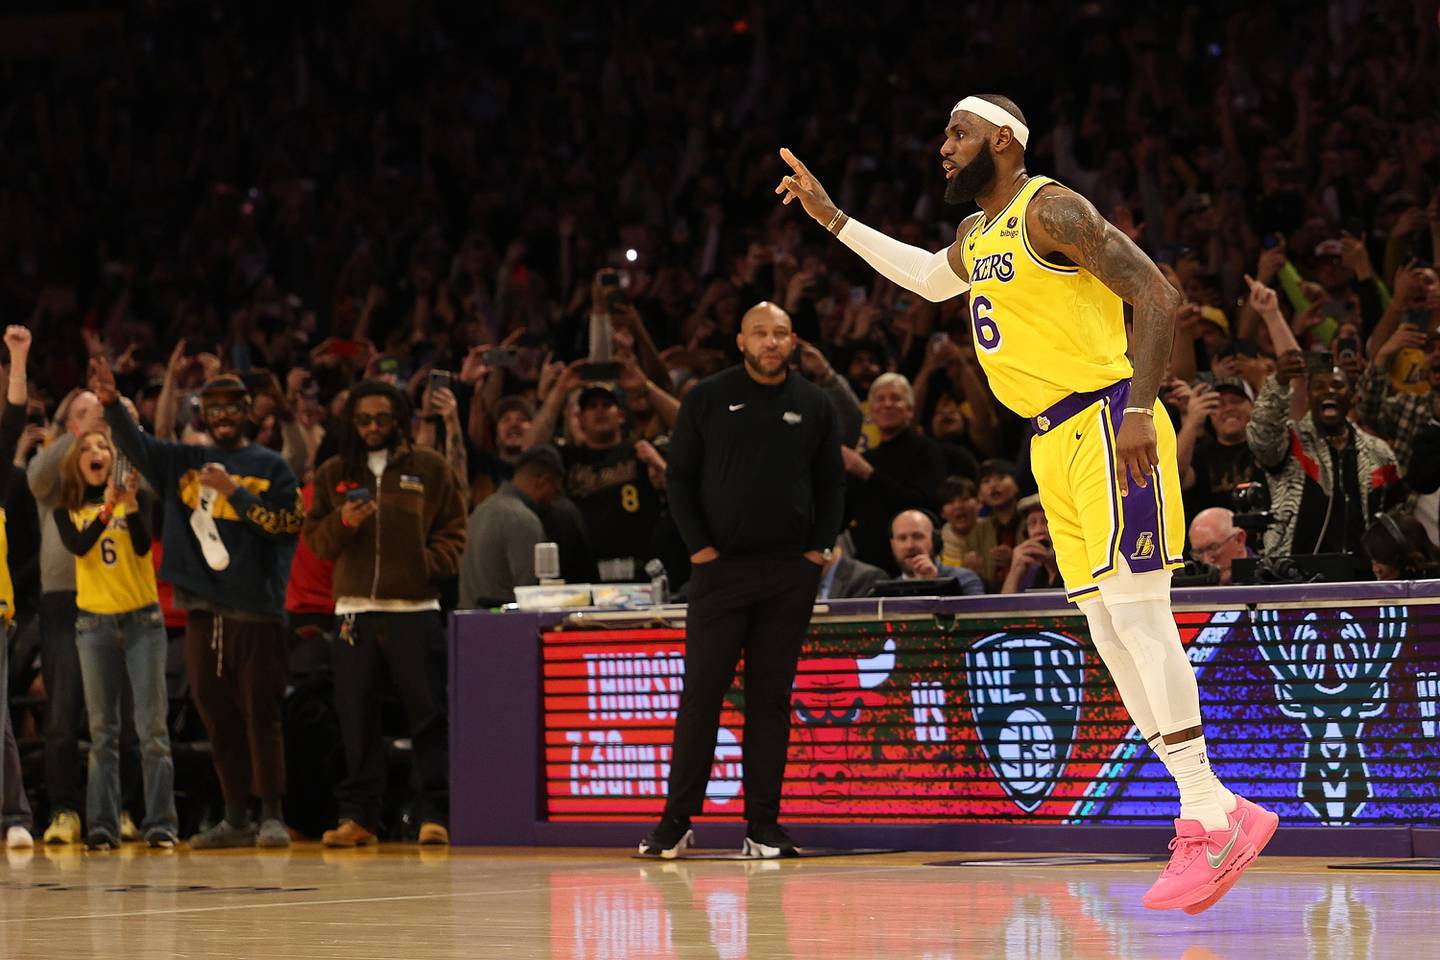 LeBron James #6 of the Los Angeles Lakers reacts after scoring to pass Kareem Abdul-Jabbar to become the NBA’s all-time leading scorer, surpassing Abdul-Jabbar's career total of 38,387 points against the Oklahoma City Thunder at Crypto.com Arena on Feb. 7, 2023 in Los Angeles, California.